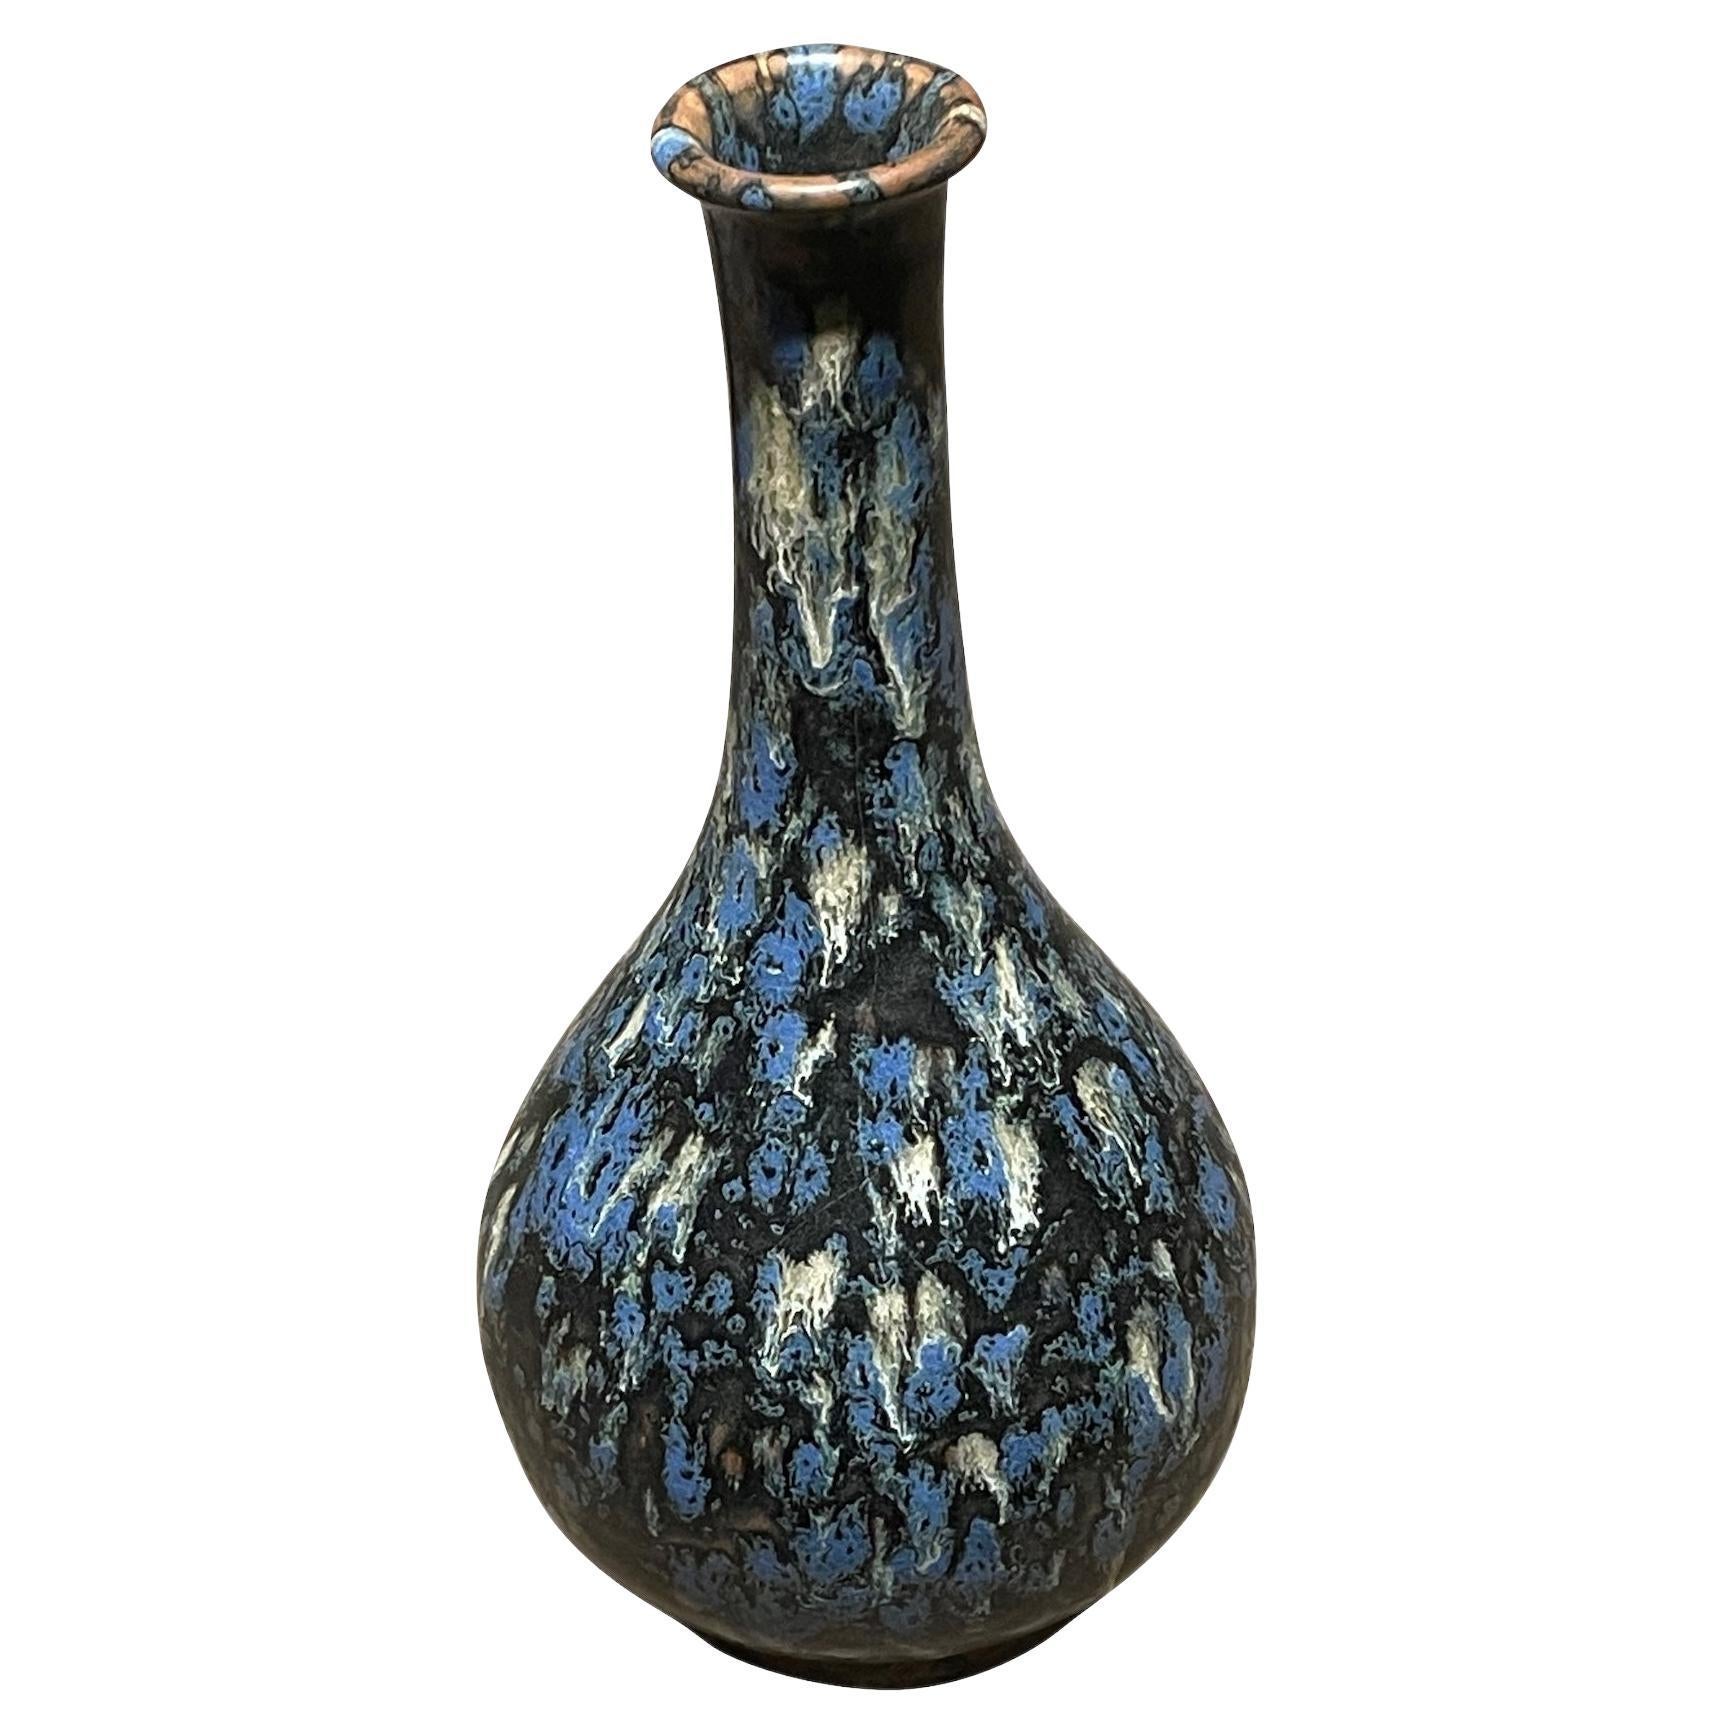 Contemporary Chinese tall thin neck vase with black, blue and white splatter glaze.
One of several from collection of similar glaze in various shapes.
